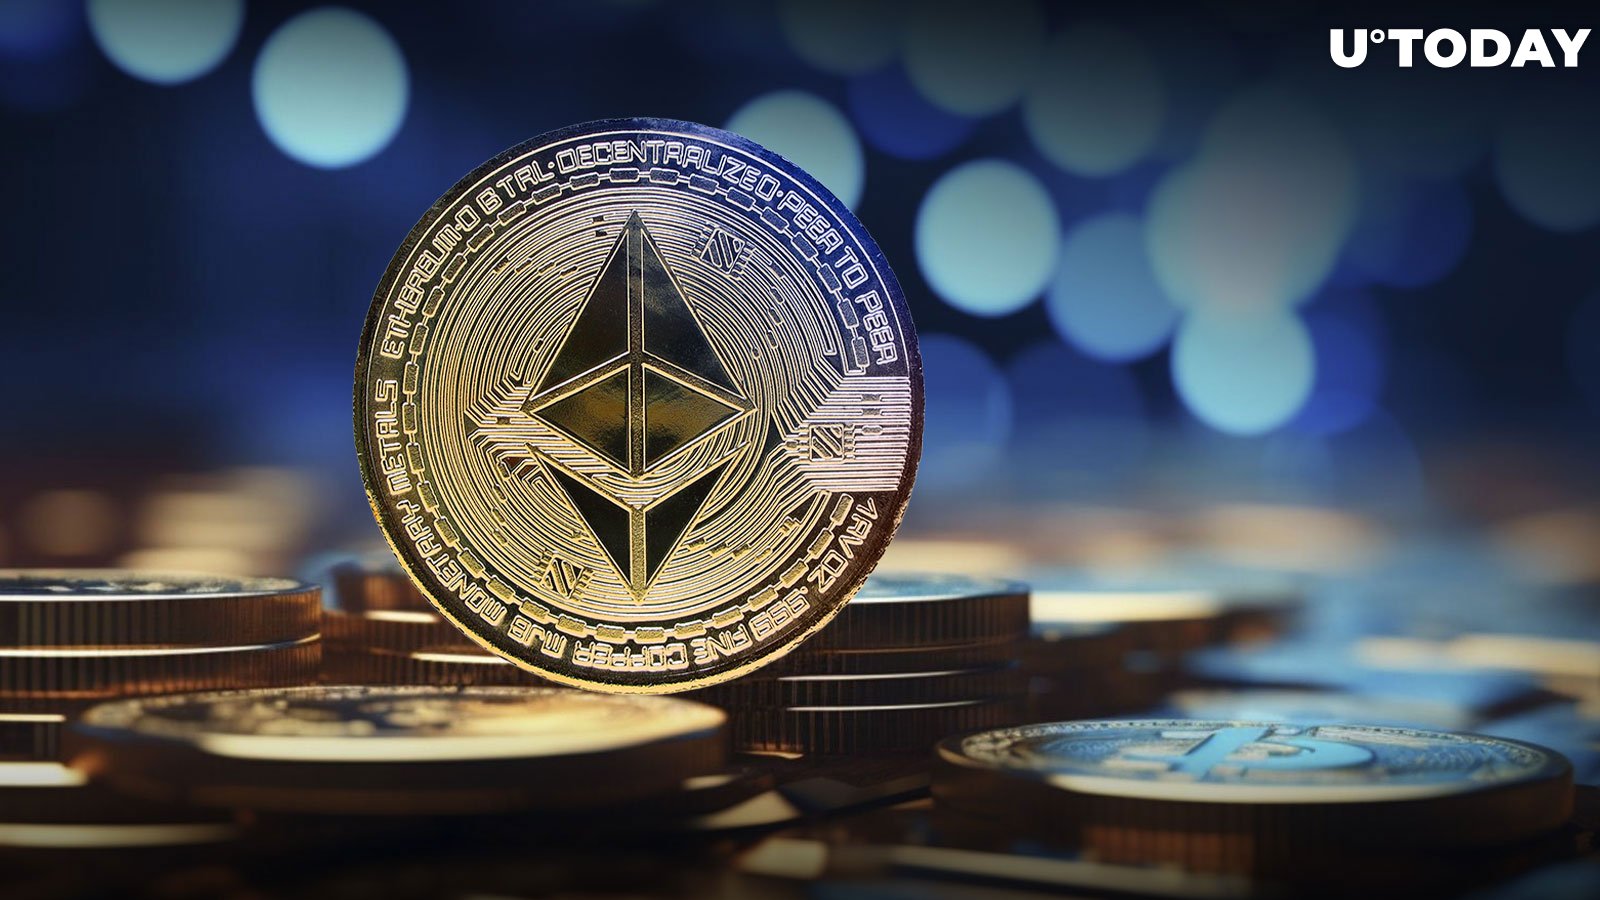 Early Ethereum Investor Awakens After 8 Years